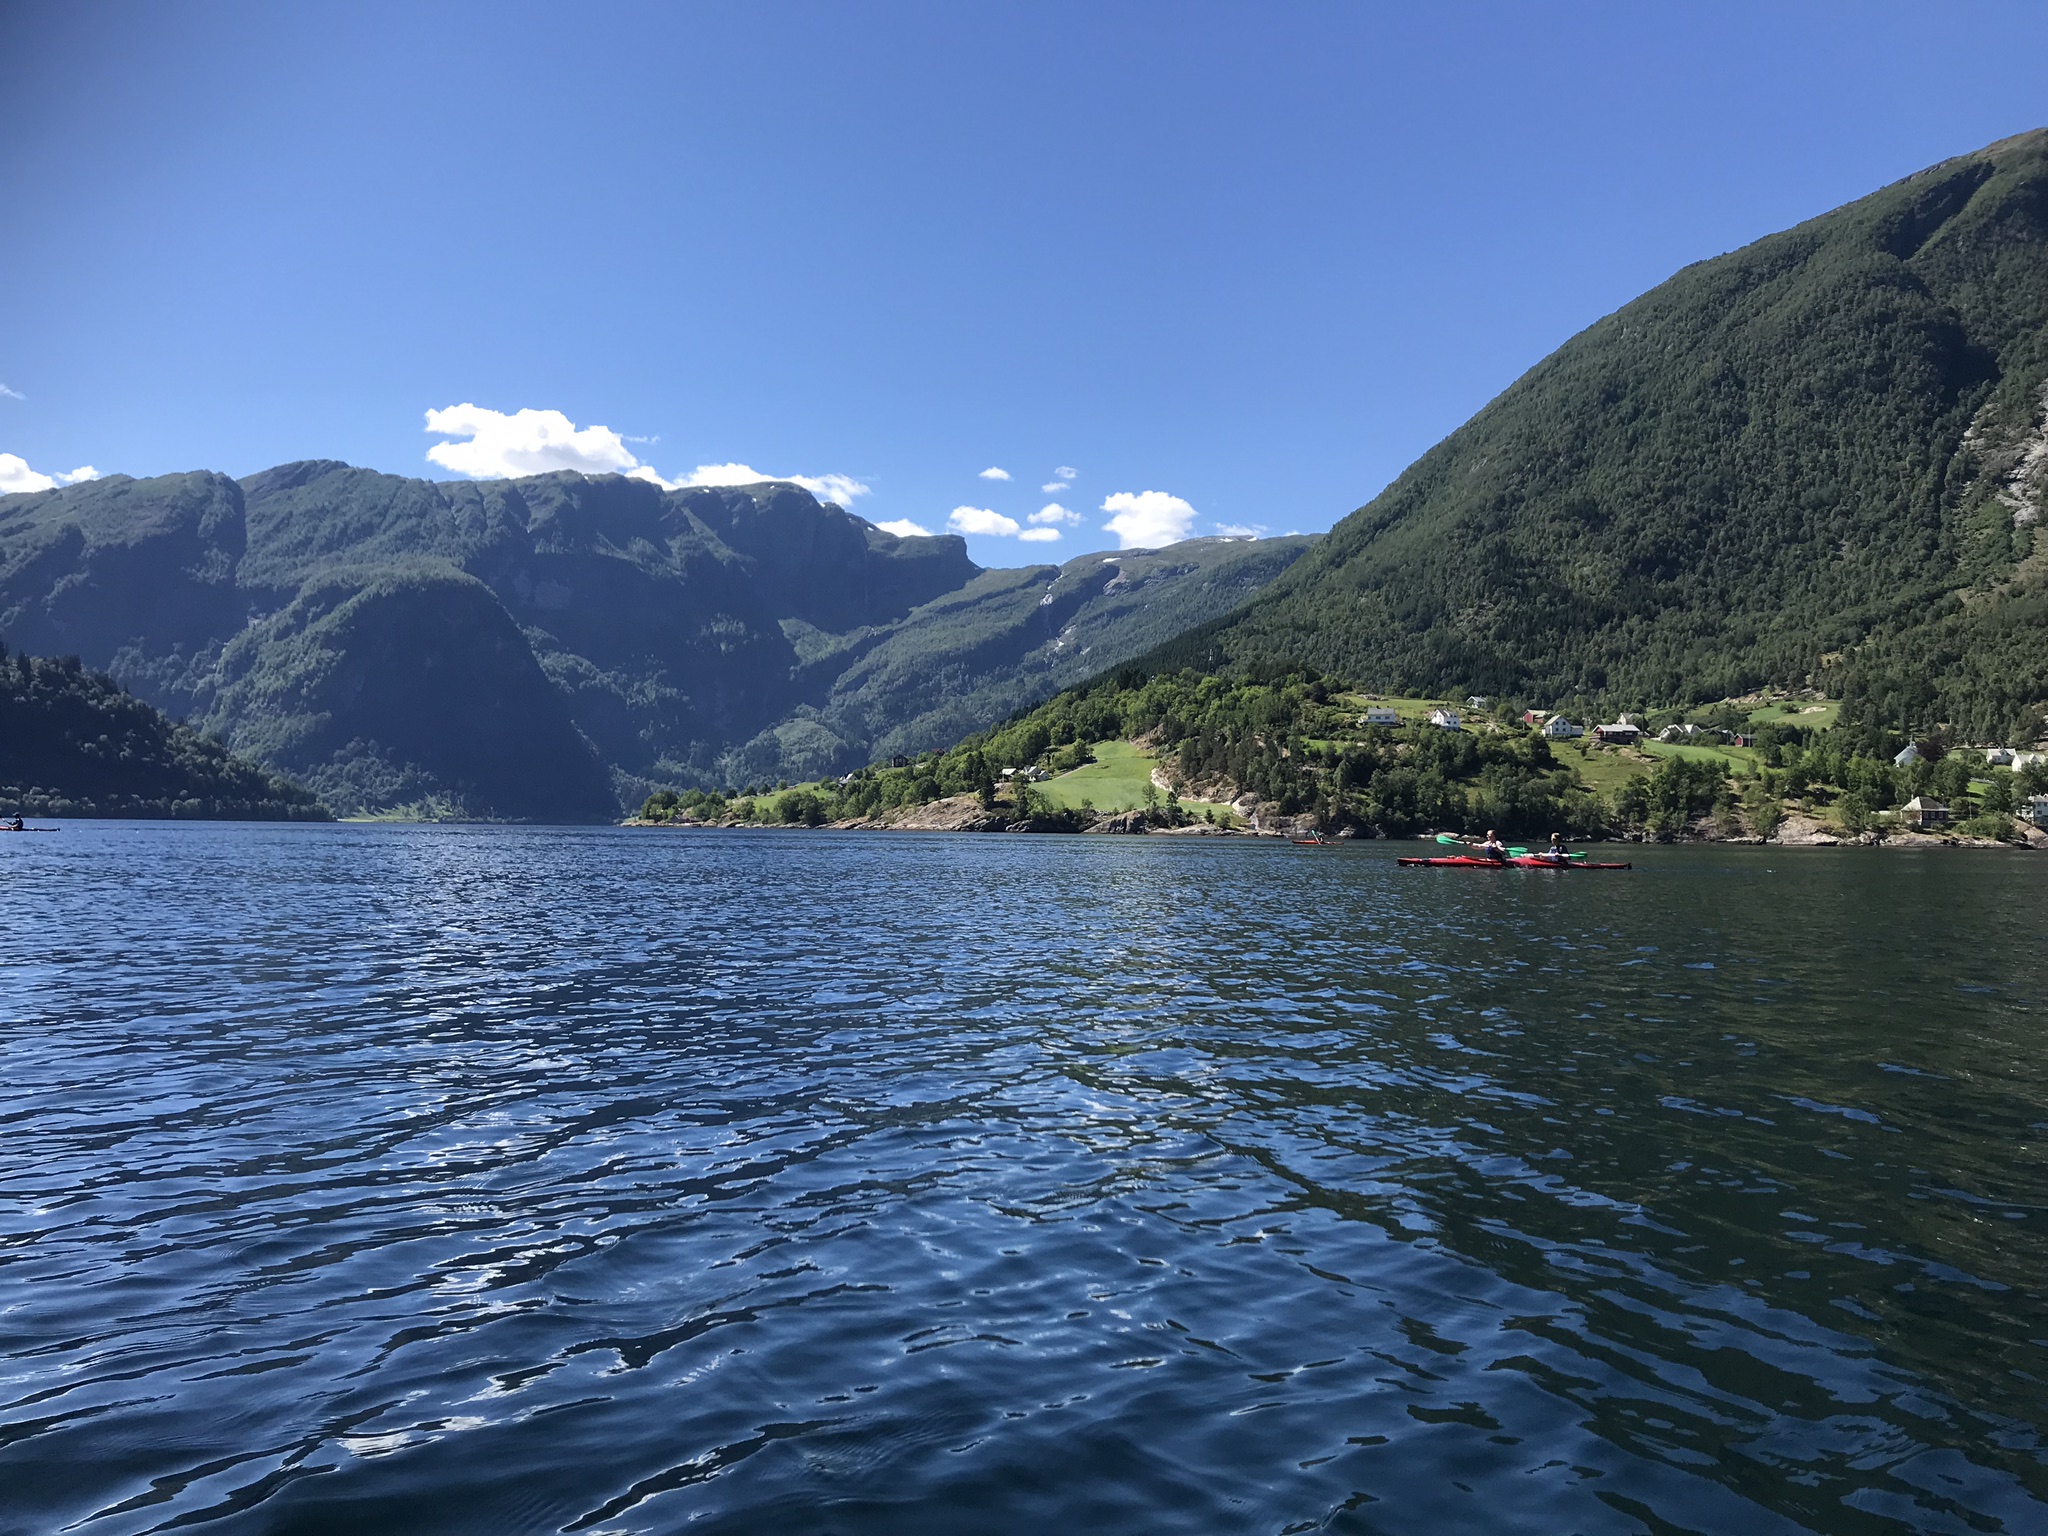 Sea kayaking in the Sognefjord